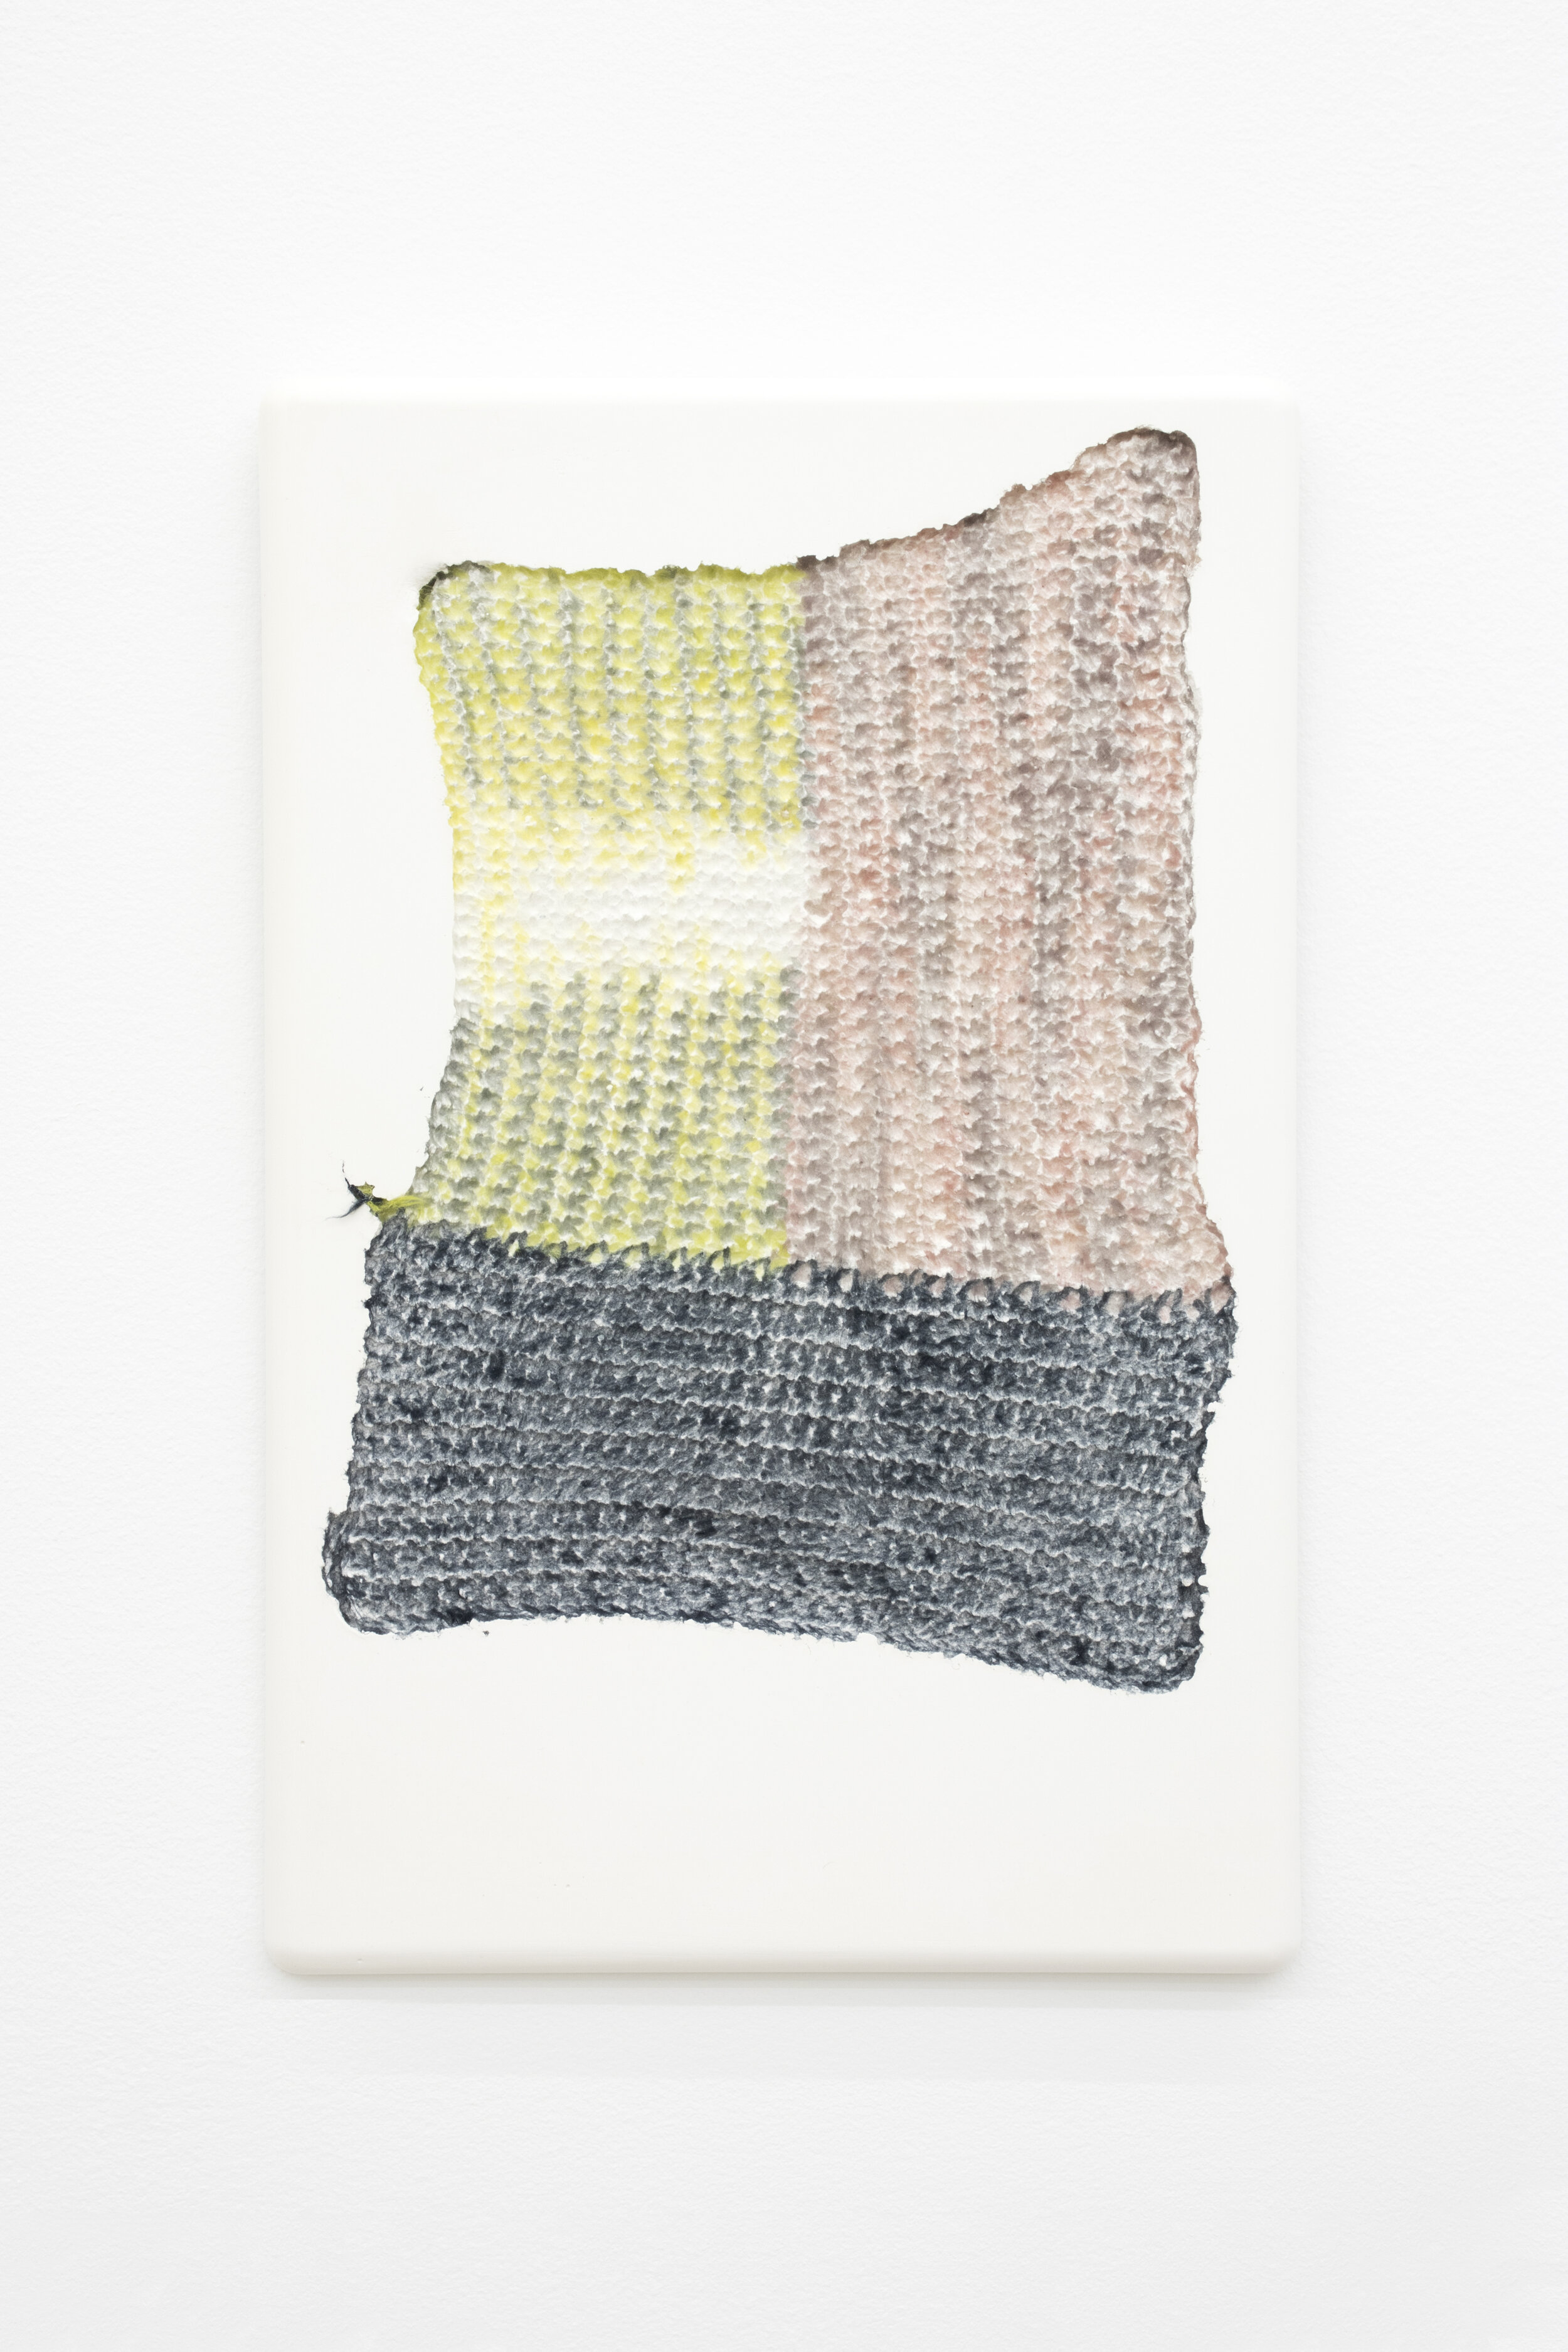  Michelle Grabner   Untitled,  2020  plaster cast with dyed cotton fibers  20 x 13 in. 